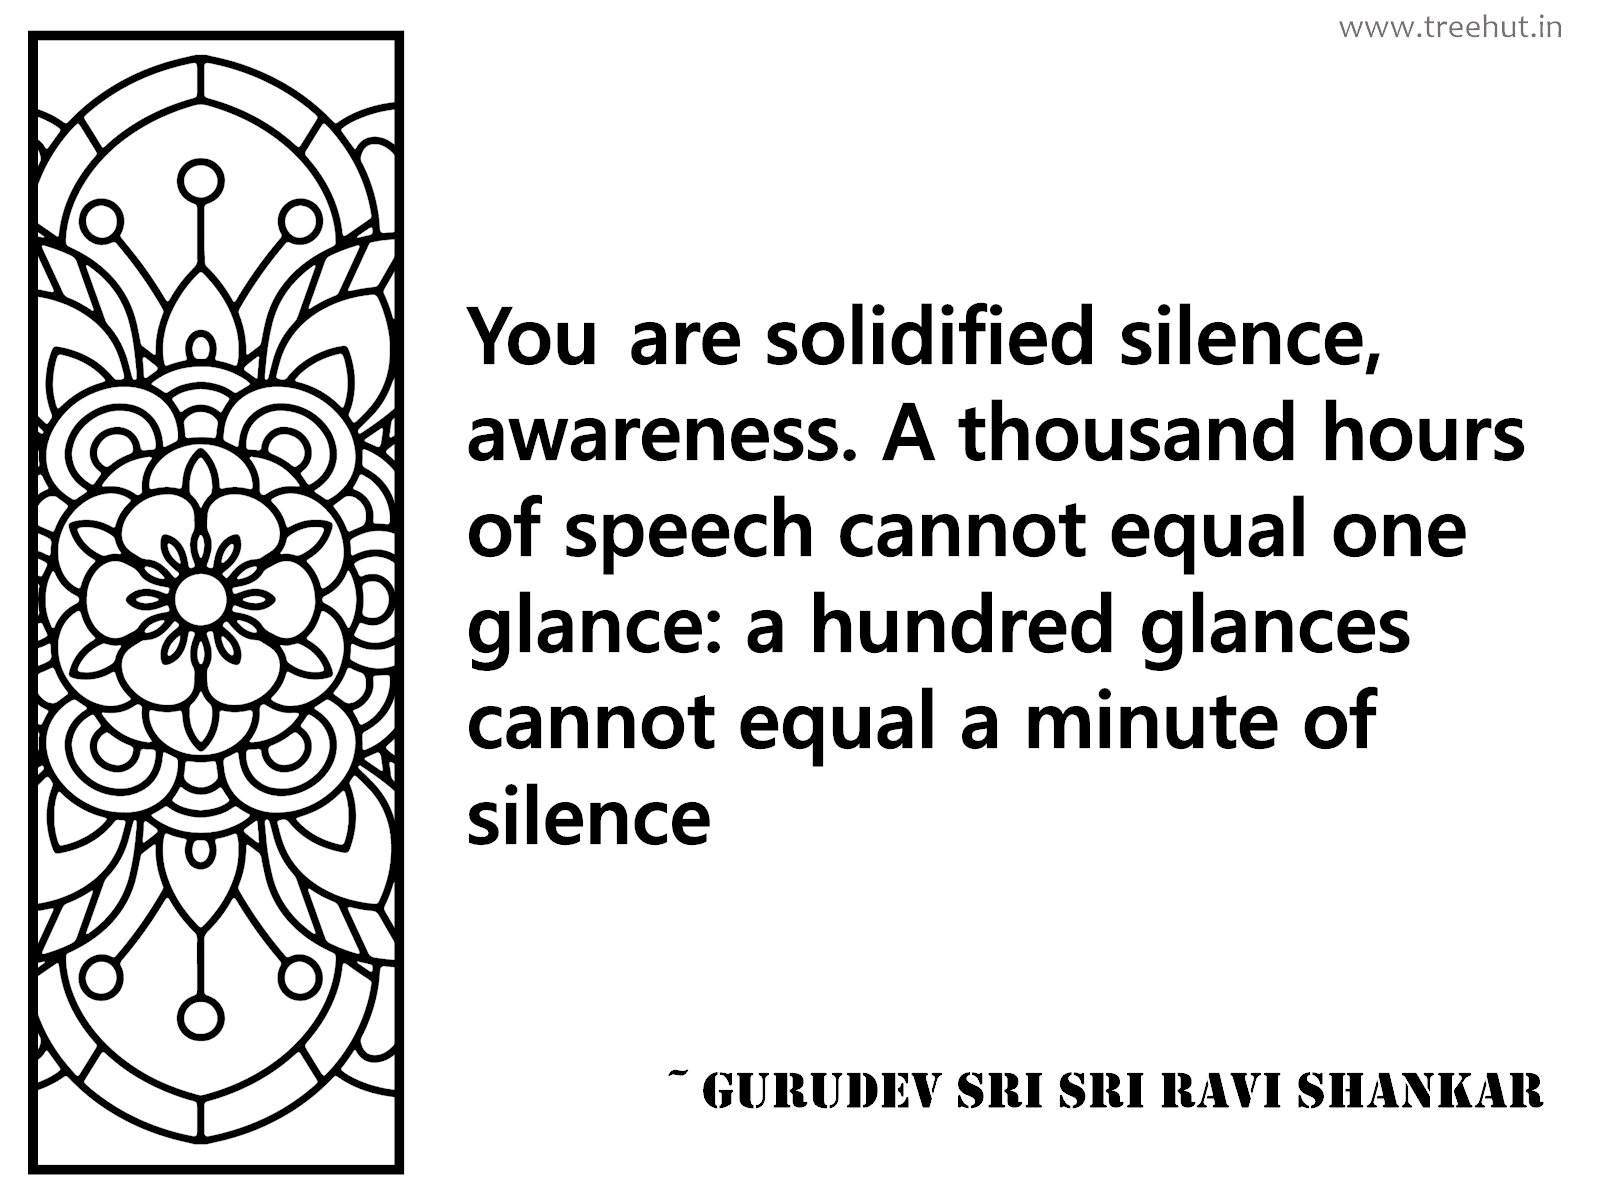 You are solidified silence, awareness. A thousand hours of speech cannot equal one glance: a hundred glances cannot equal a minute of silence Inspirational Quote by Gurudev Sri Sri Ravi Shankar, coloring pages